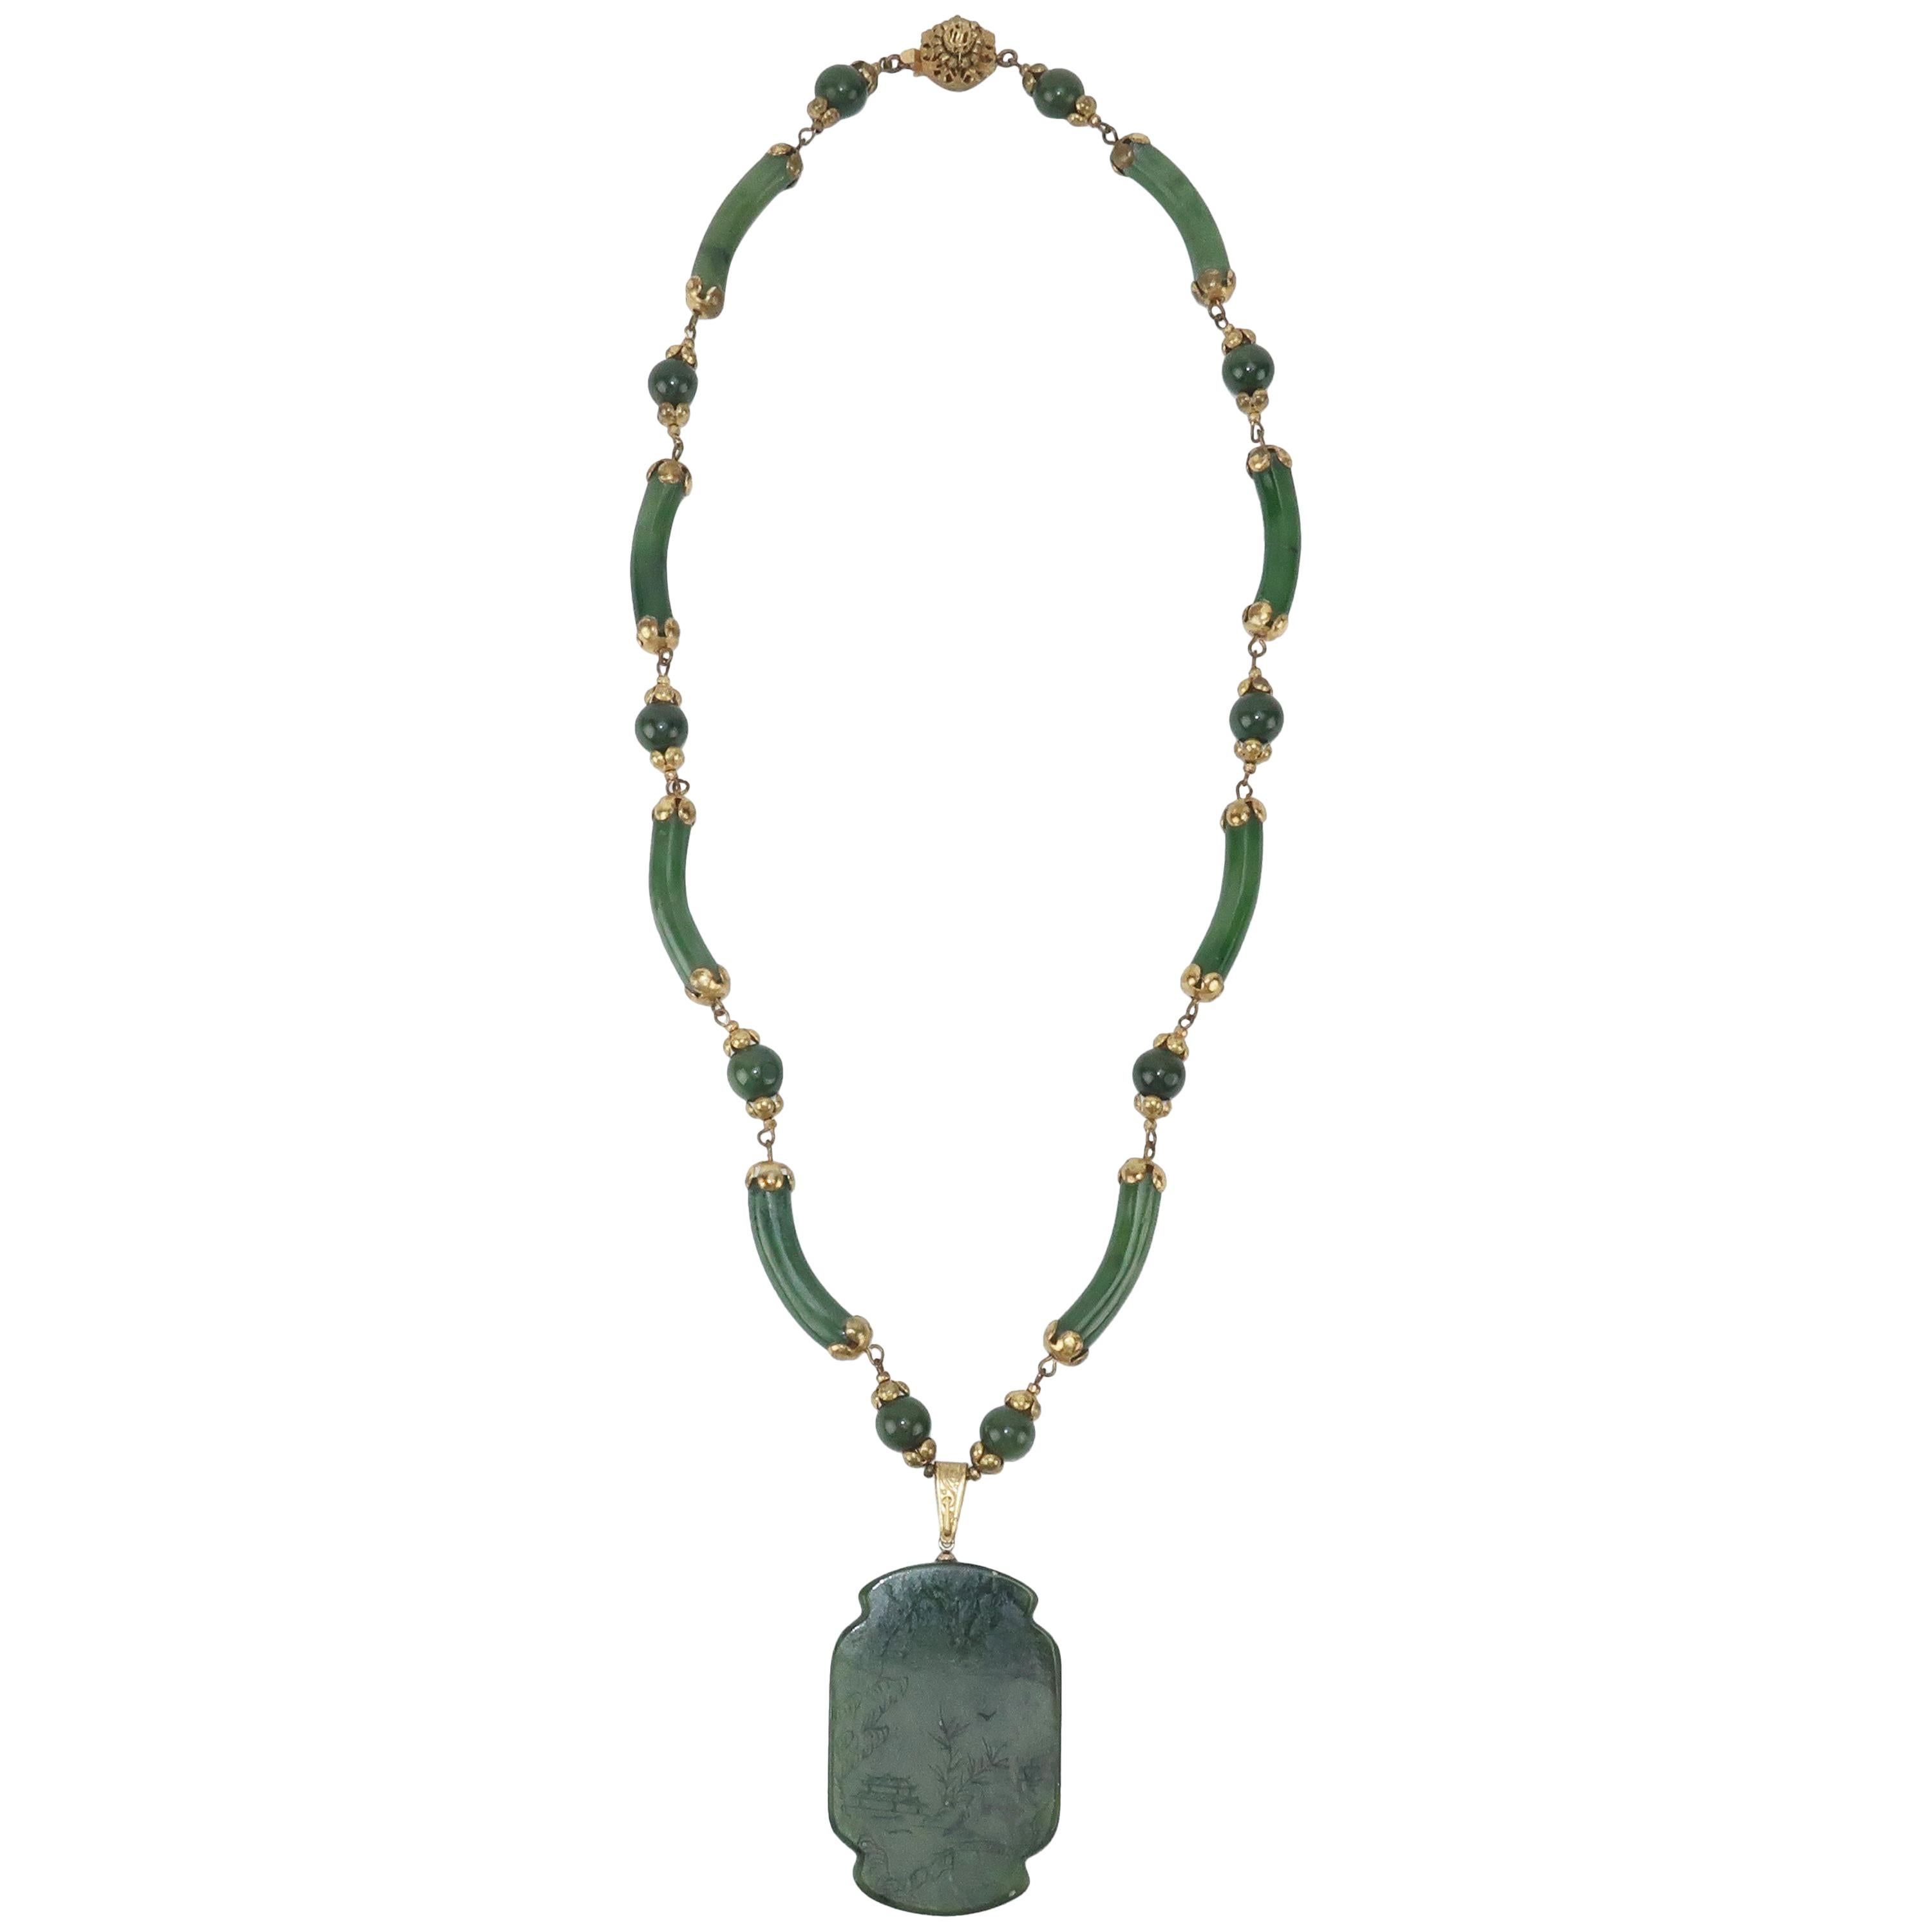 C.1950 Miriam Haskell Green Jade Asian Art Deco Inspired Necklace